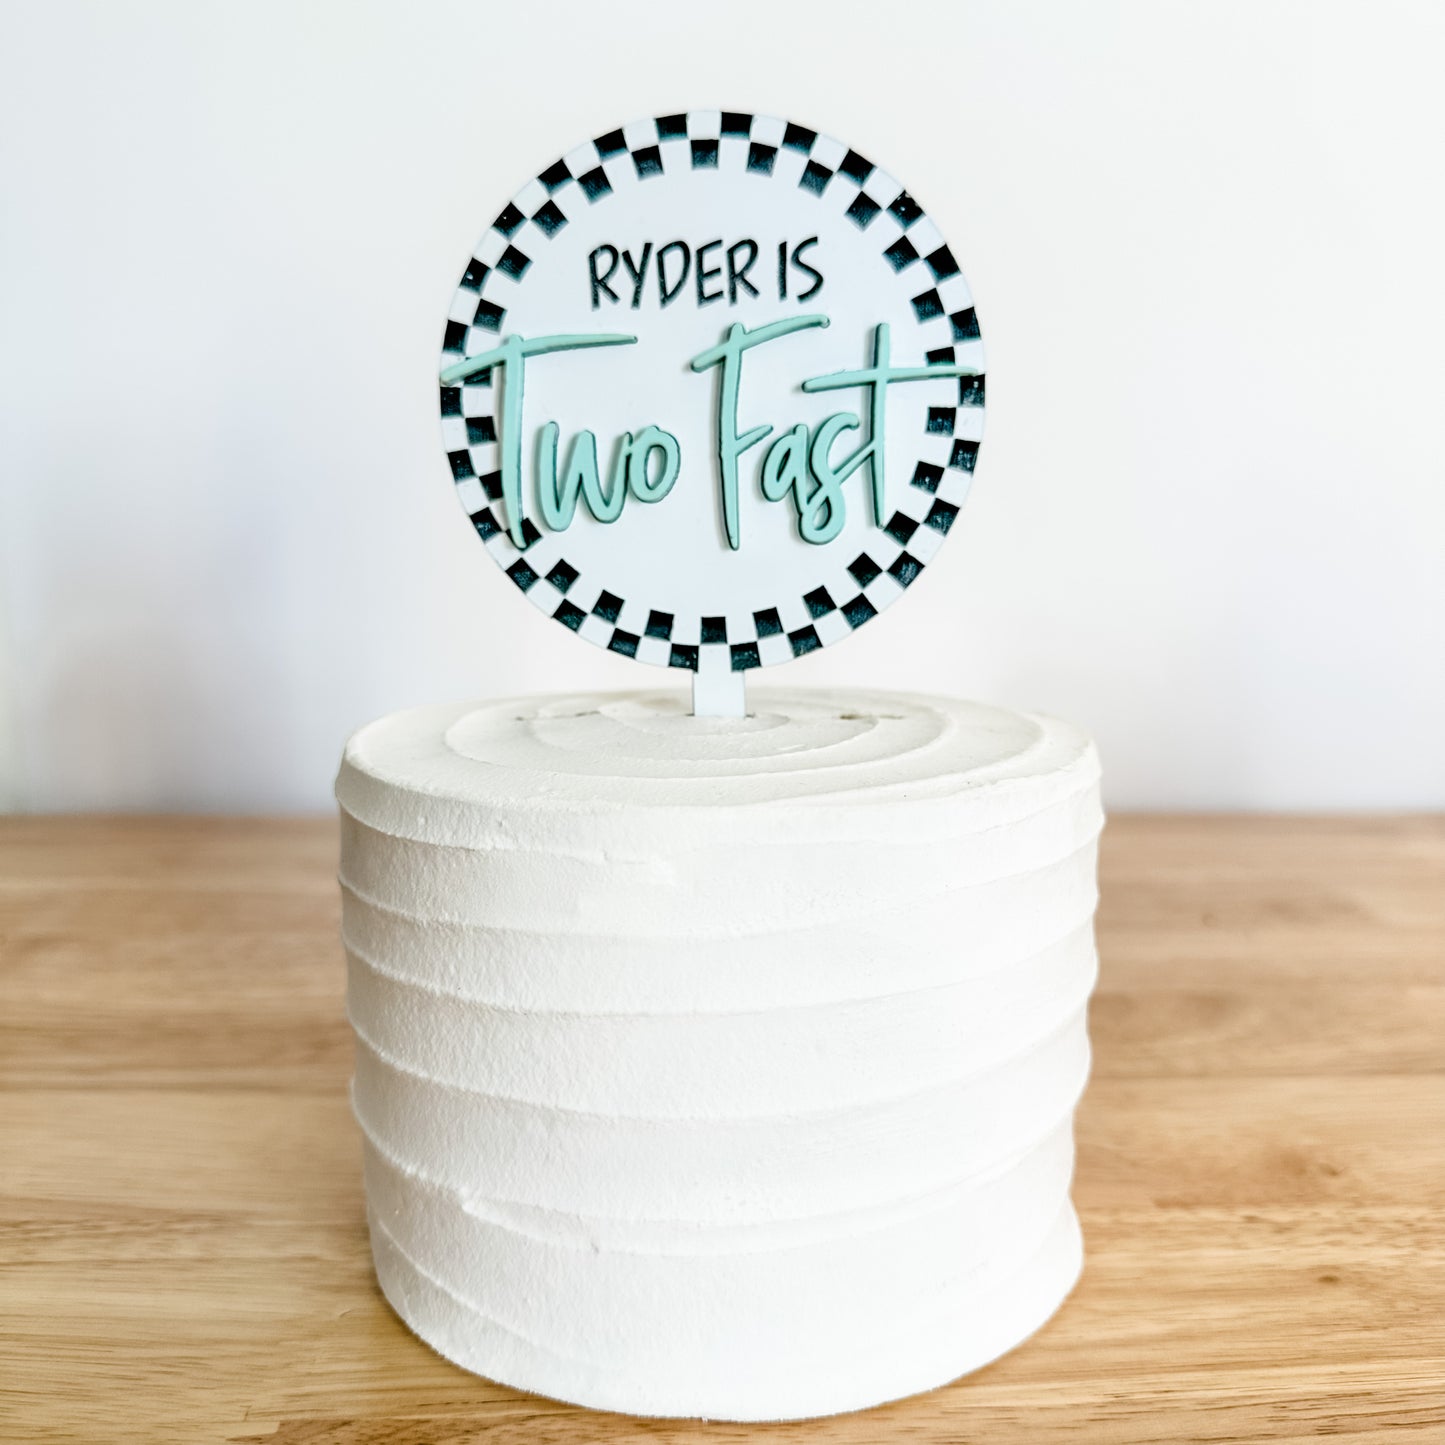 Two Fast Cake Topper